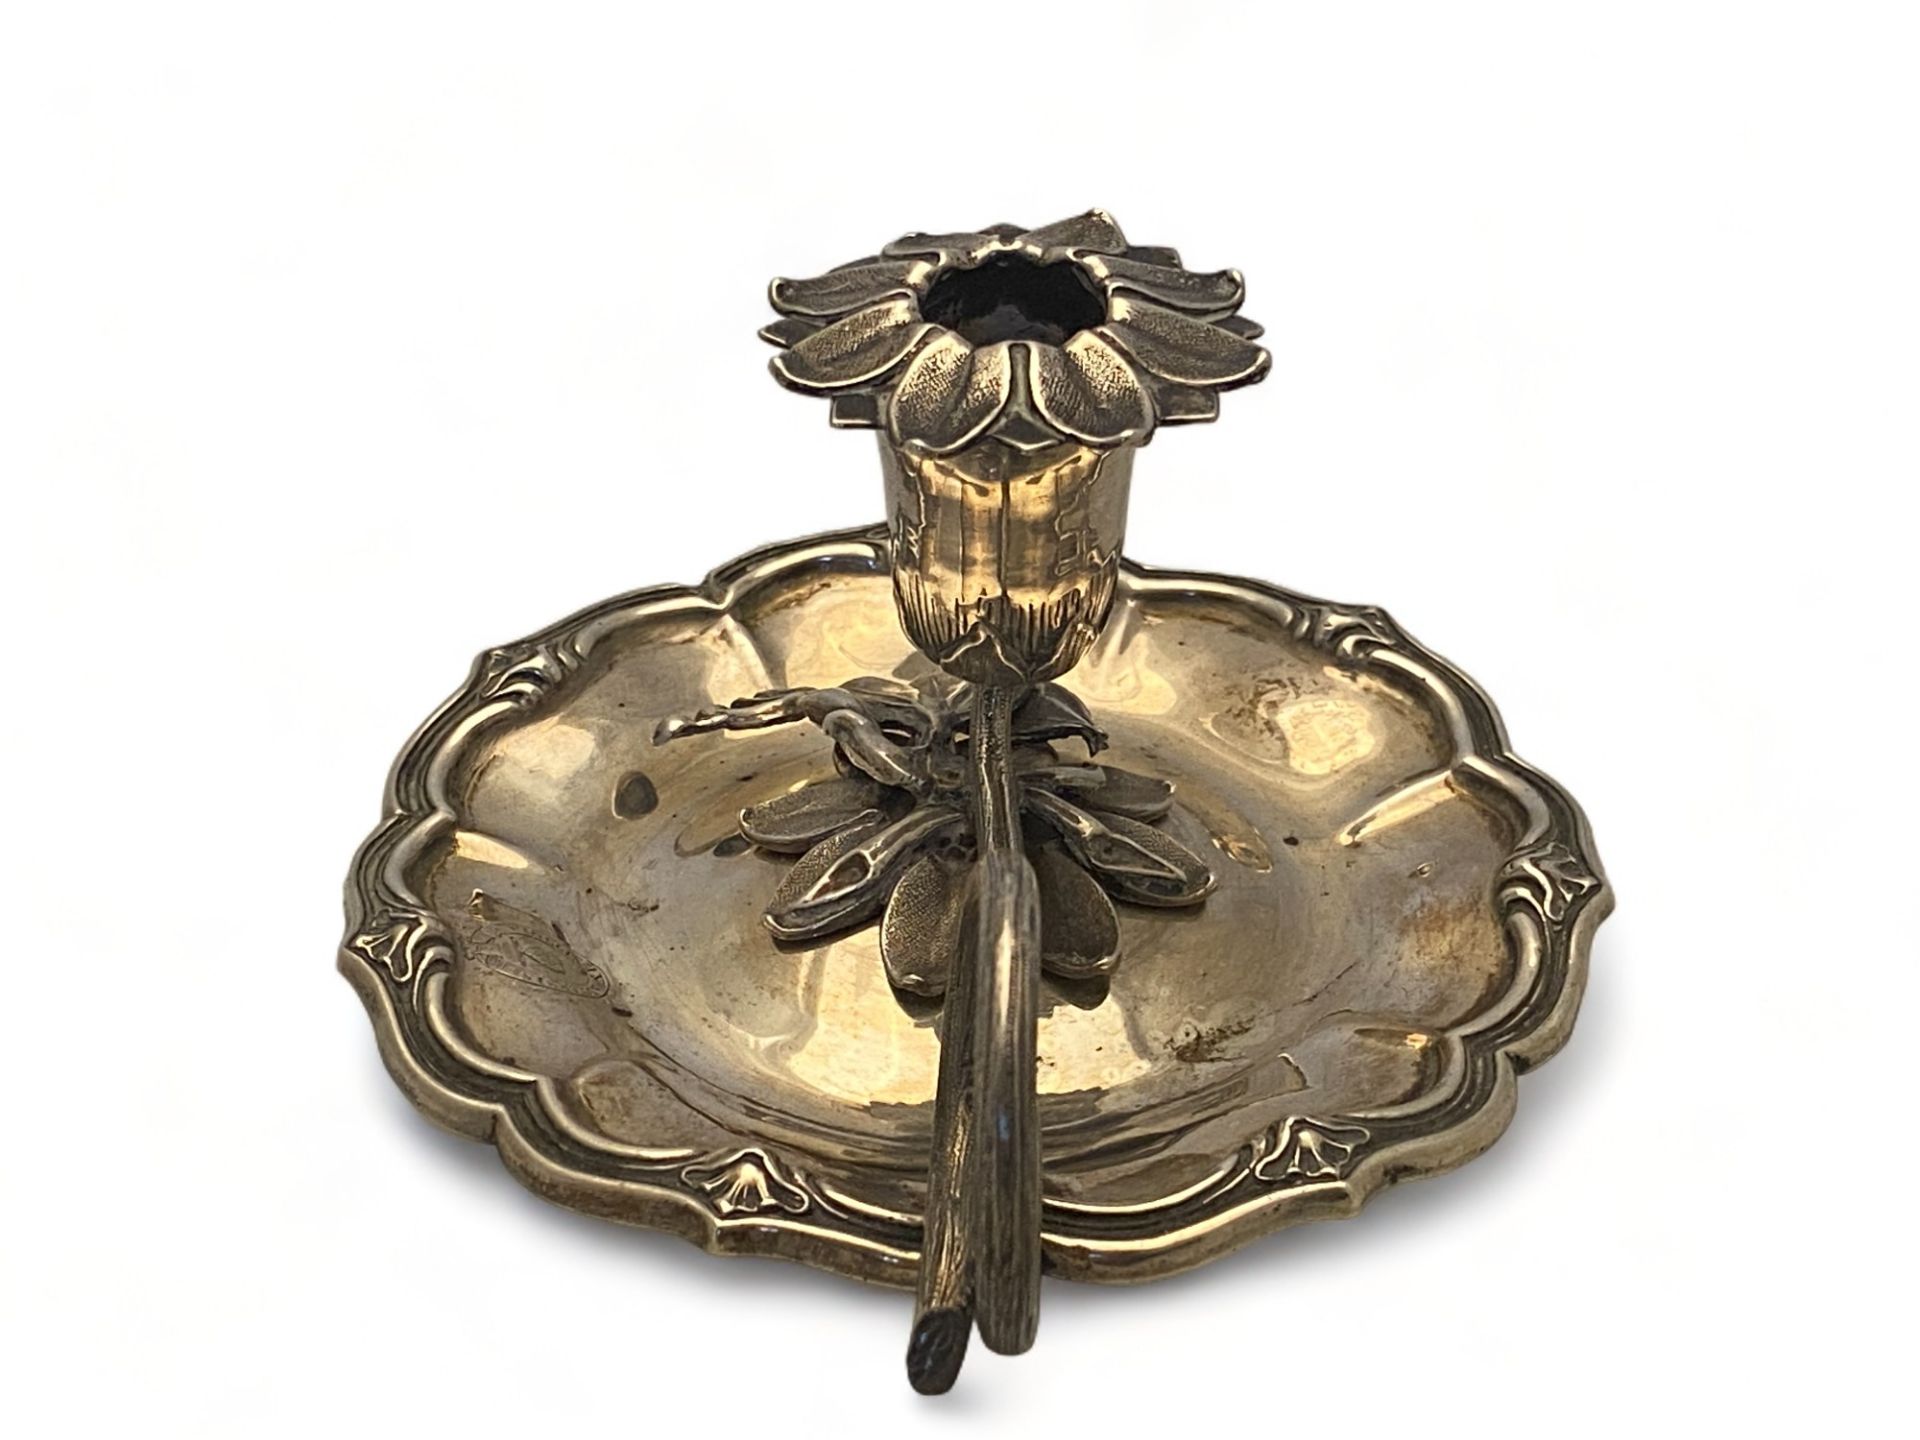 A William IV silver chamberstick with sconce cover, Charles Reily and George Storer, London, 1836 - Image 2 of 16